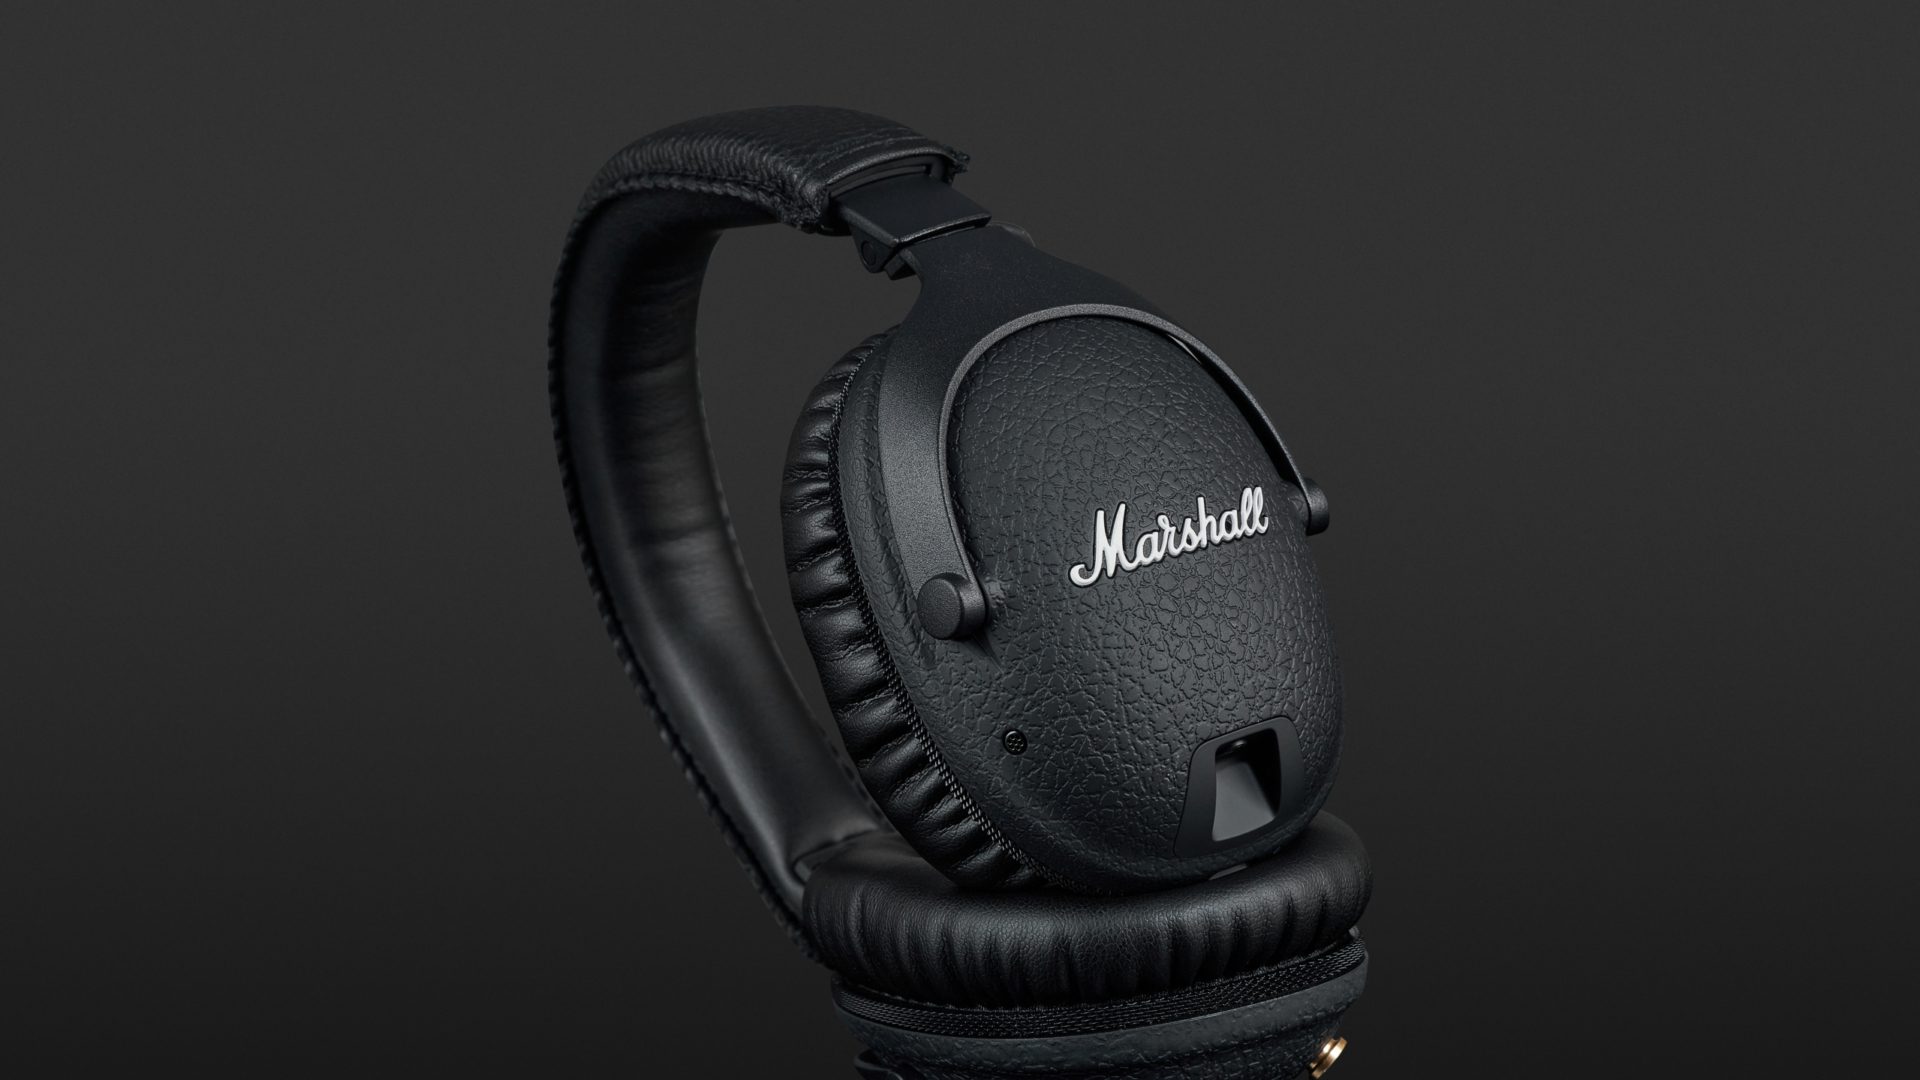 A.N.C. Review II Monitor Marshall